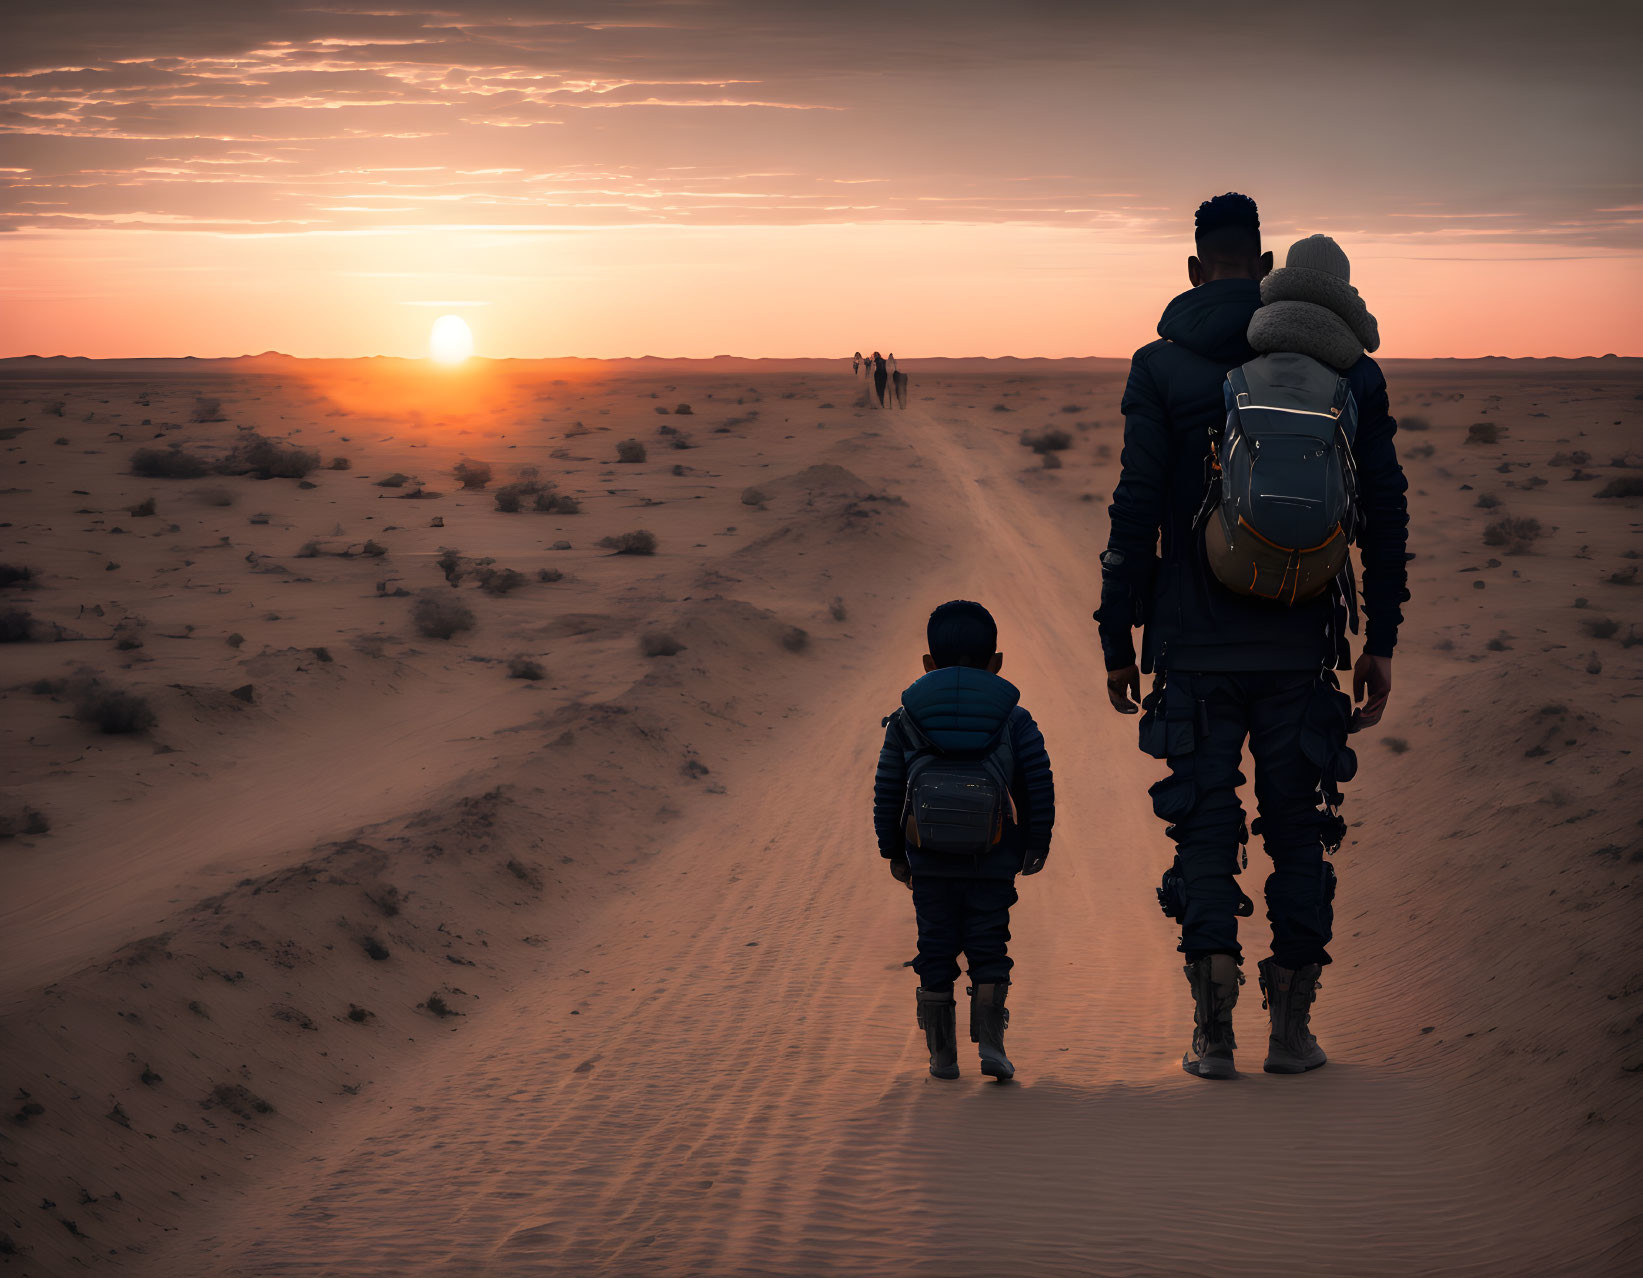 A man goes into the sunset with his son.